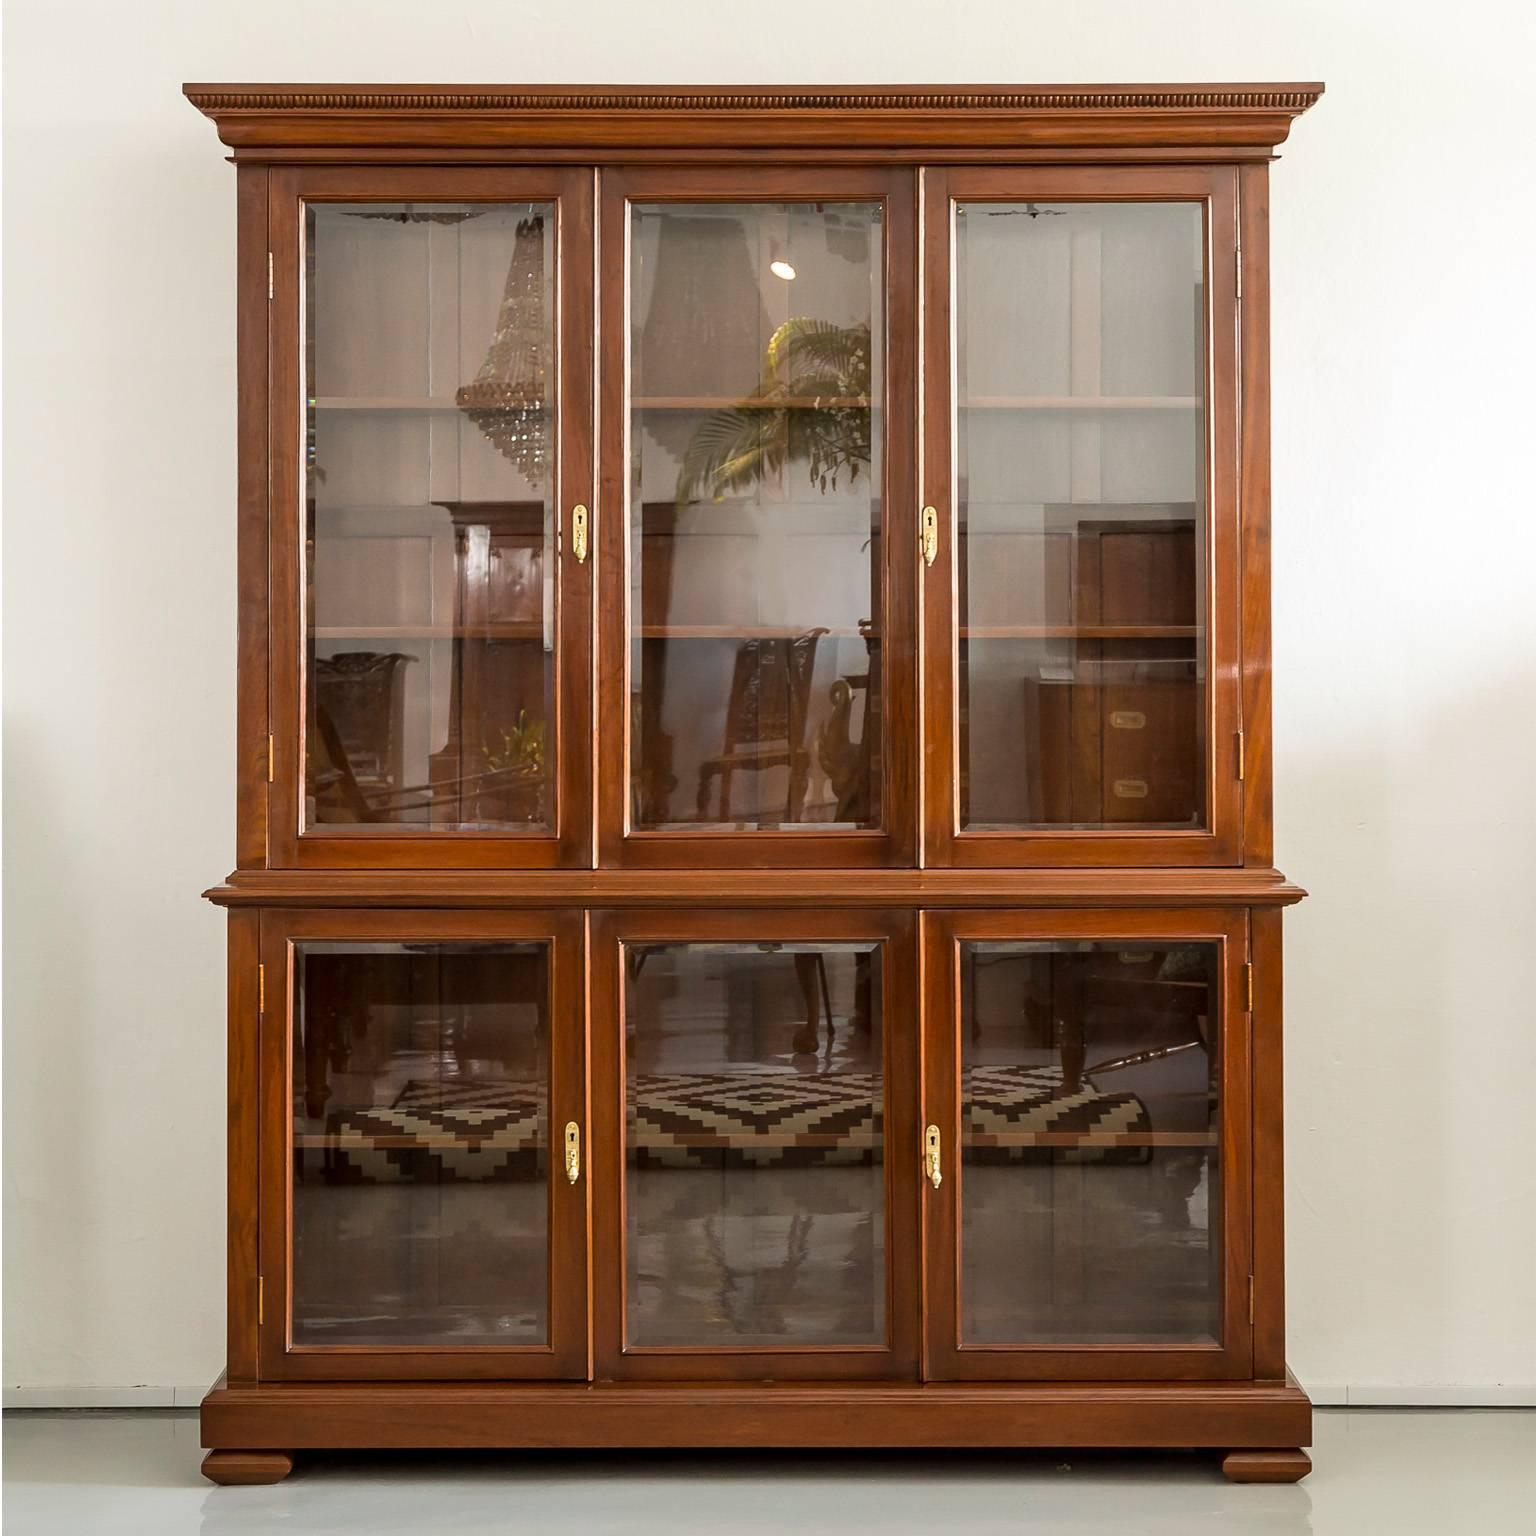 A British Colonial teak wood step back cabinet in two parts with a moulded cornice above a deep frieze. The upper section with a large glass panel flanked by a pair of glass doors, opening to two shelves. The deeper lower section also with a large